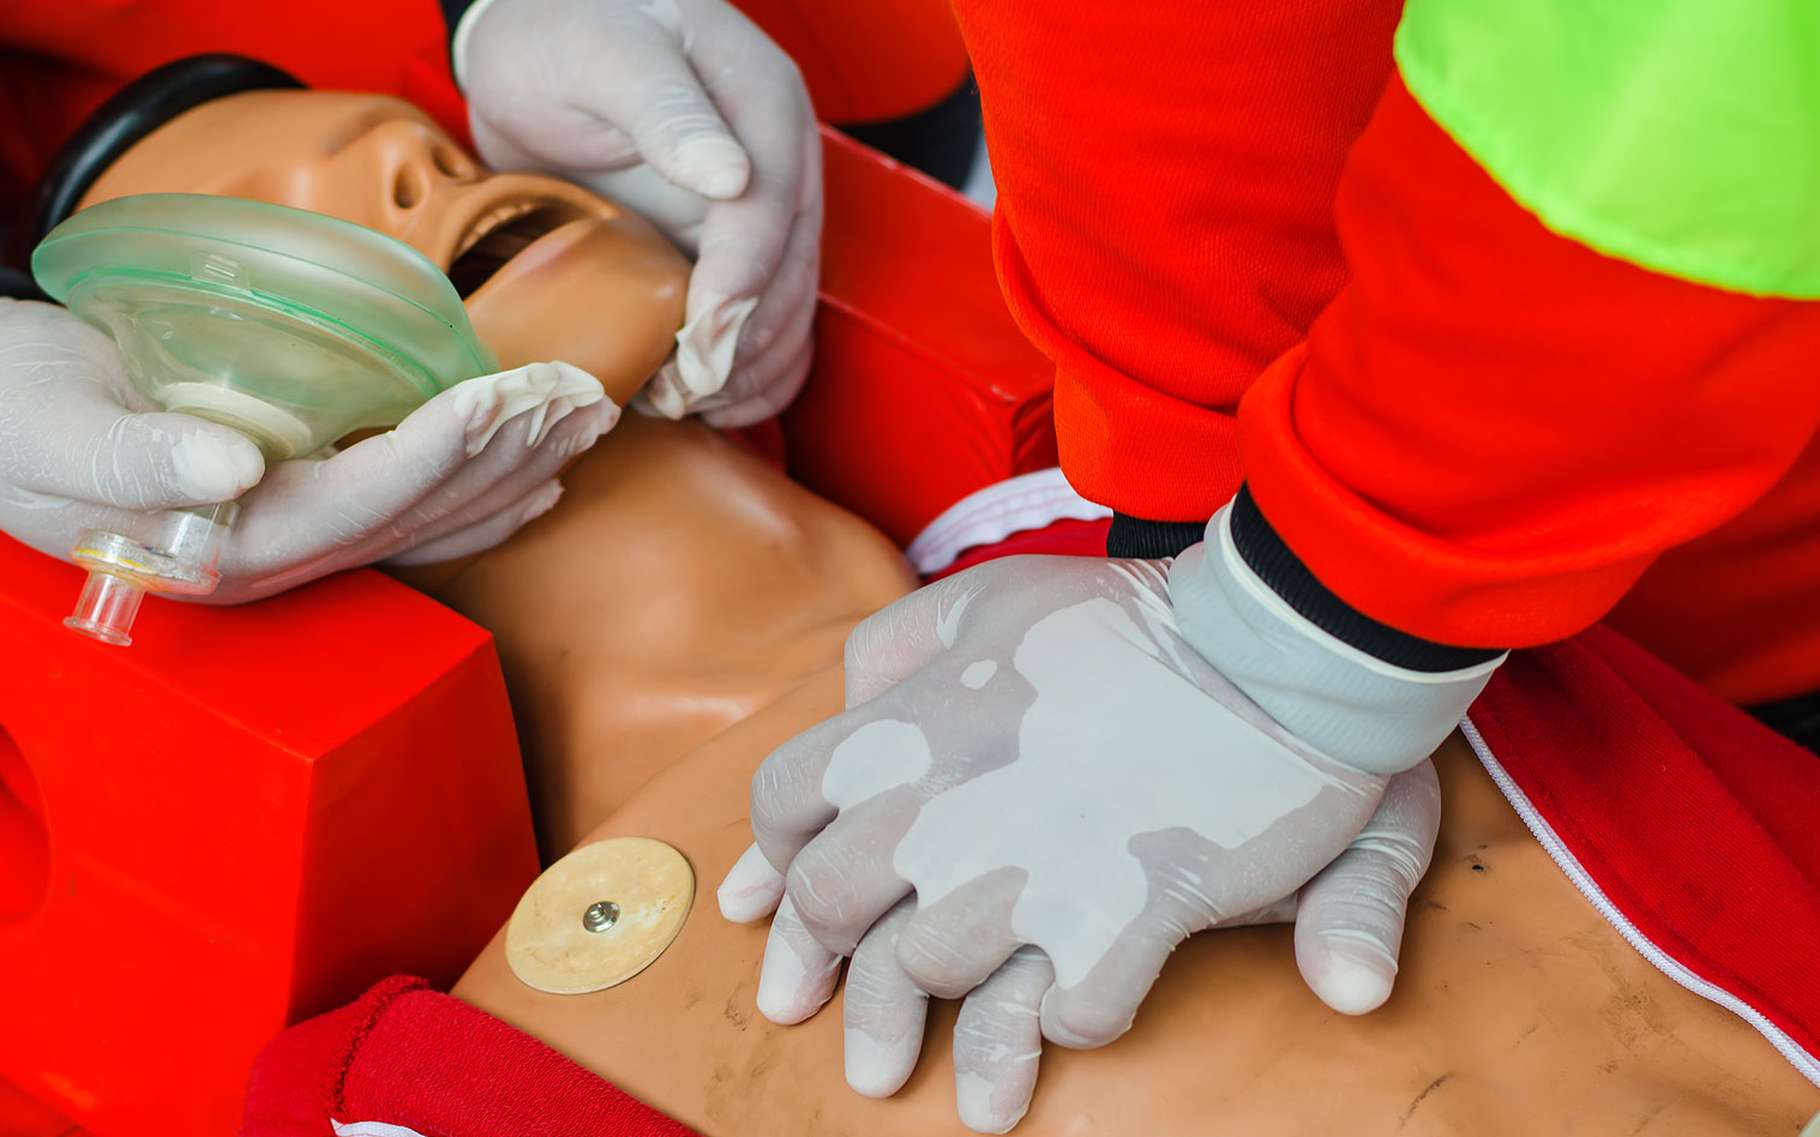 What to Consider Before Joining the Remote First Aid Course?